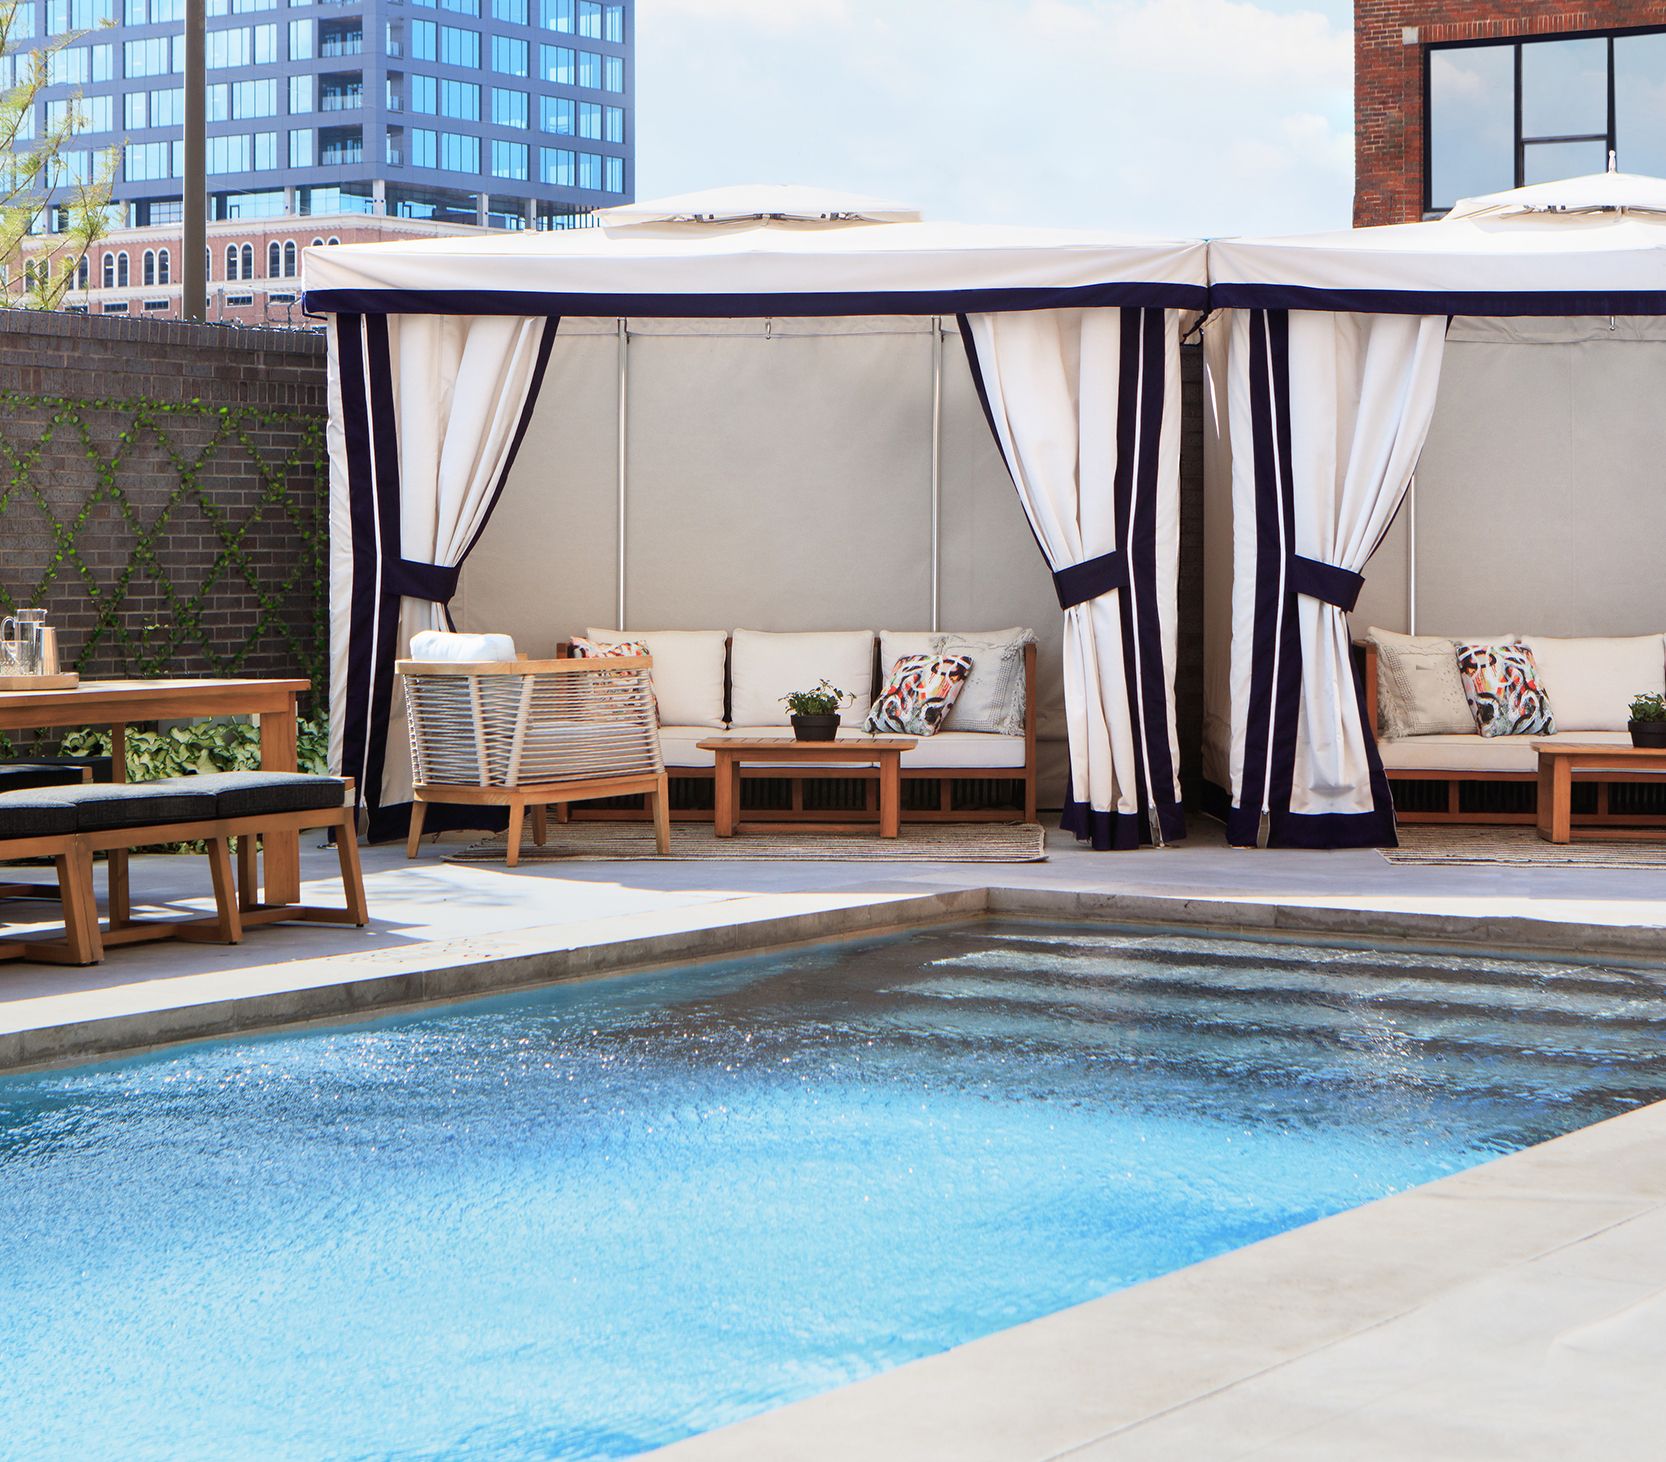 pool deck surrounded by crisp white cabanas and lounge seating